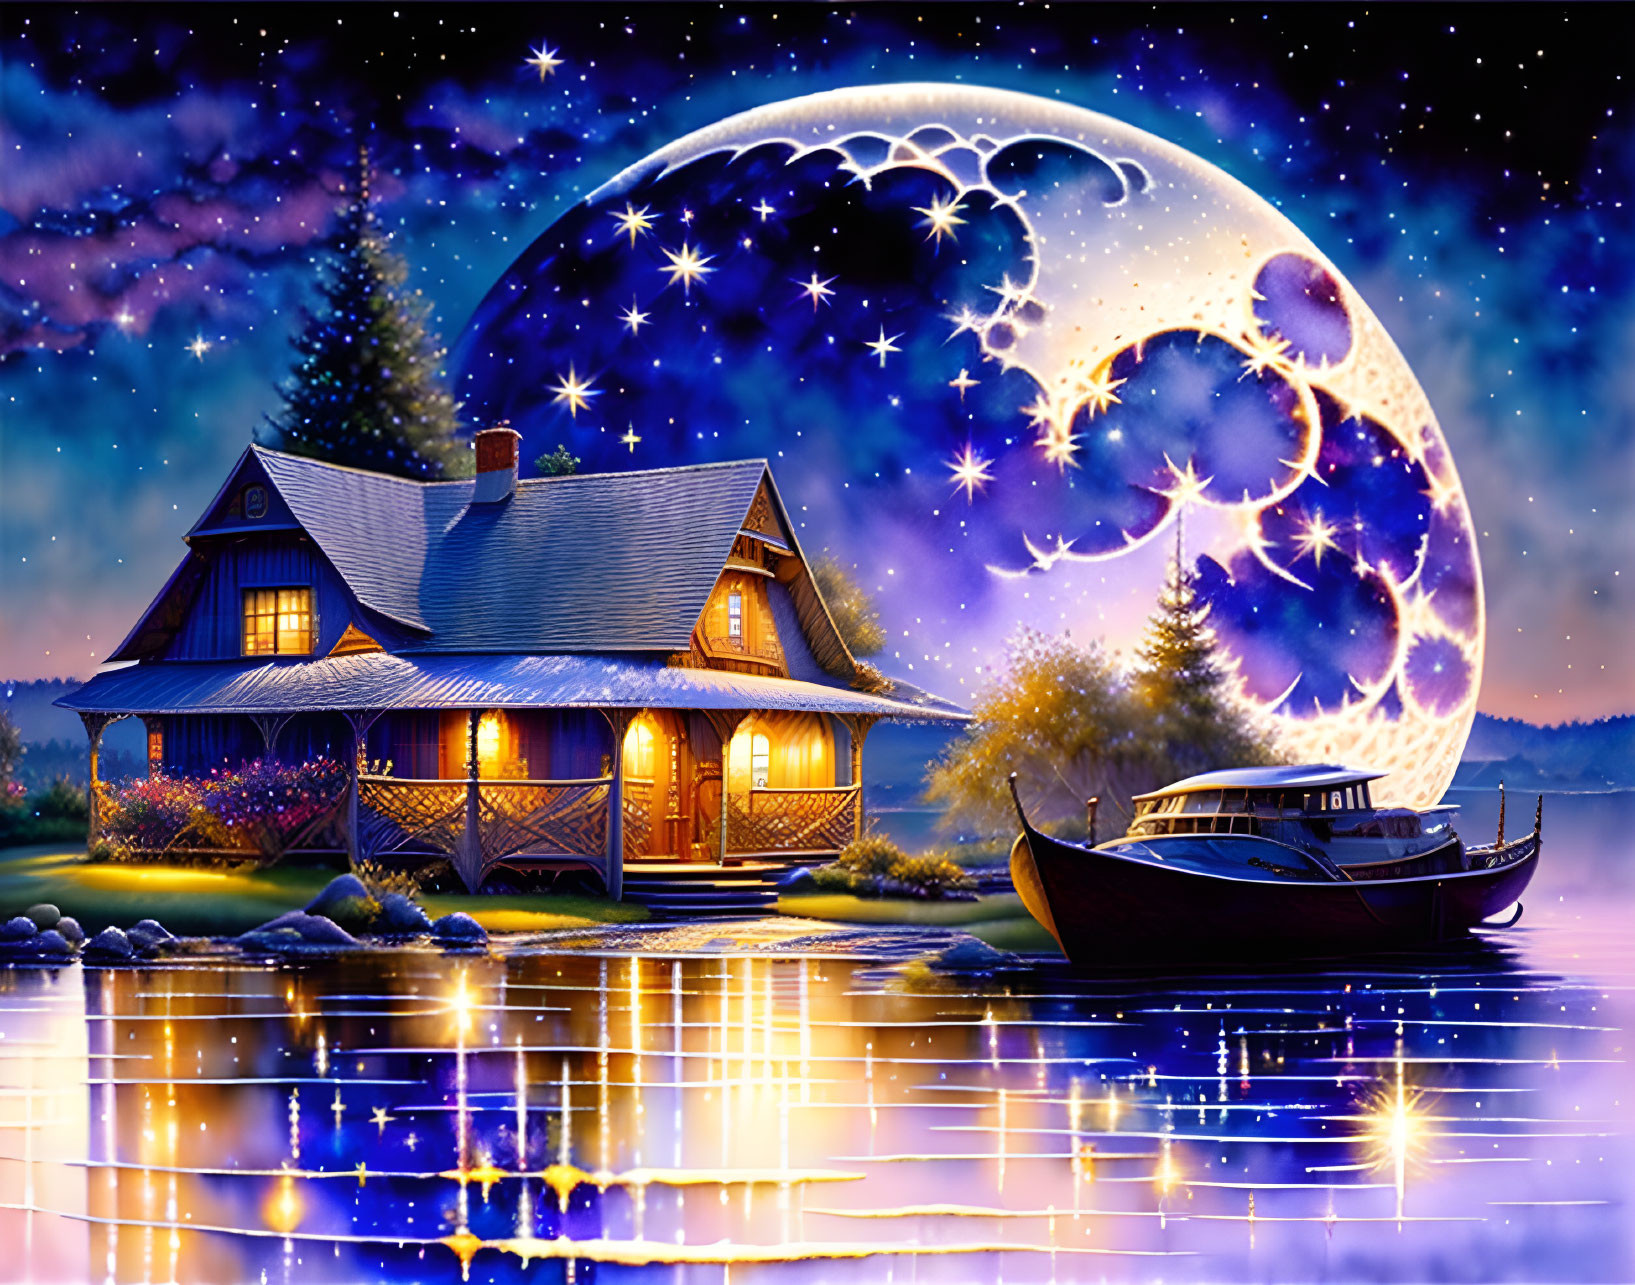 Rustic lakeside cabin at night with crescent moon and starry sky